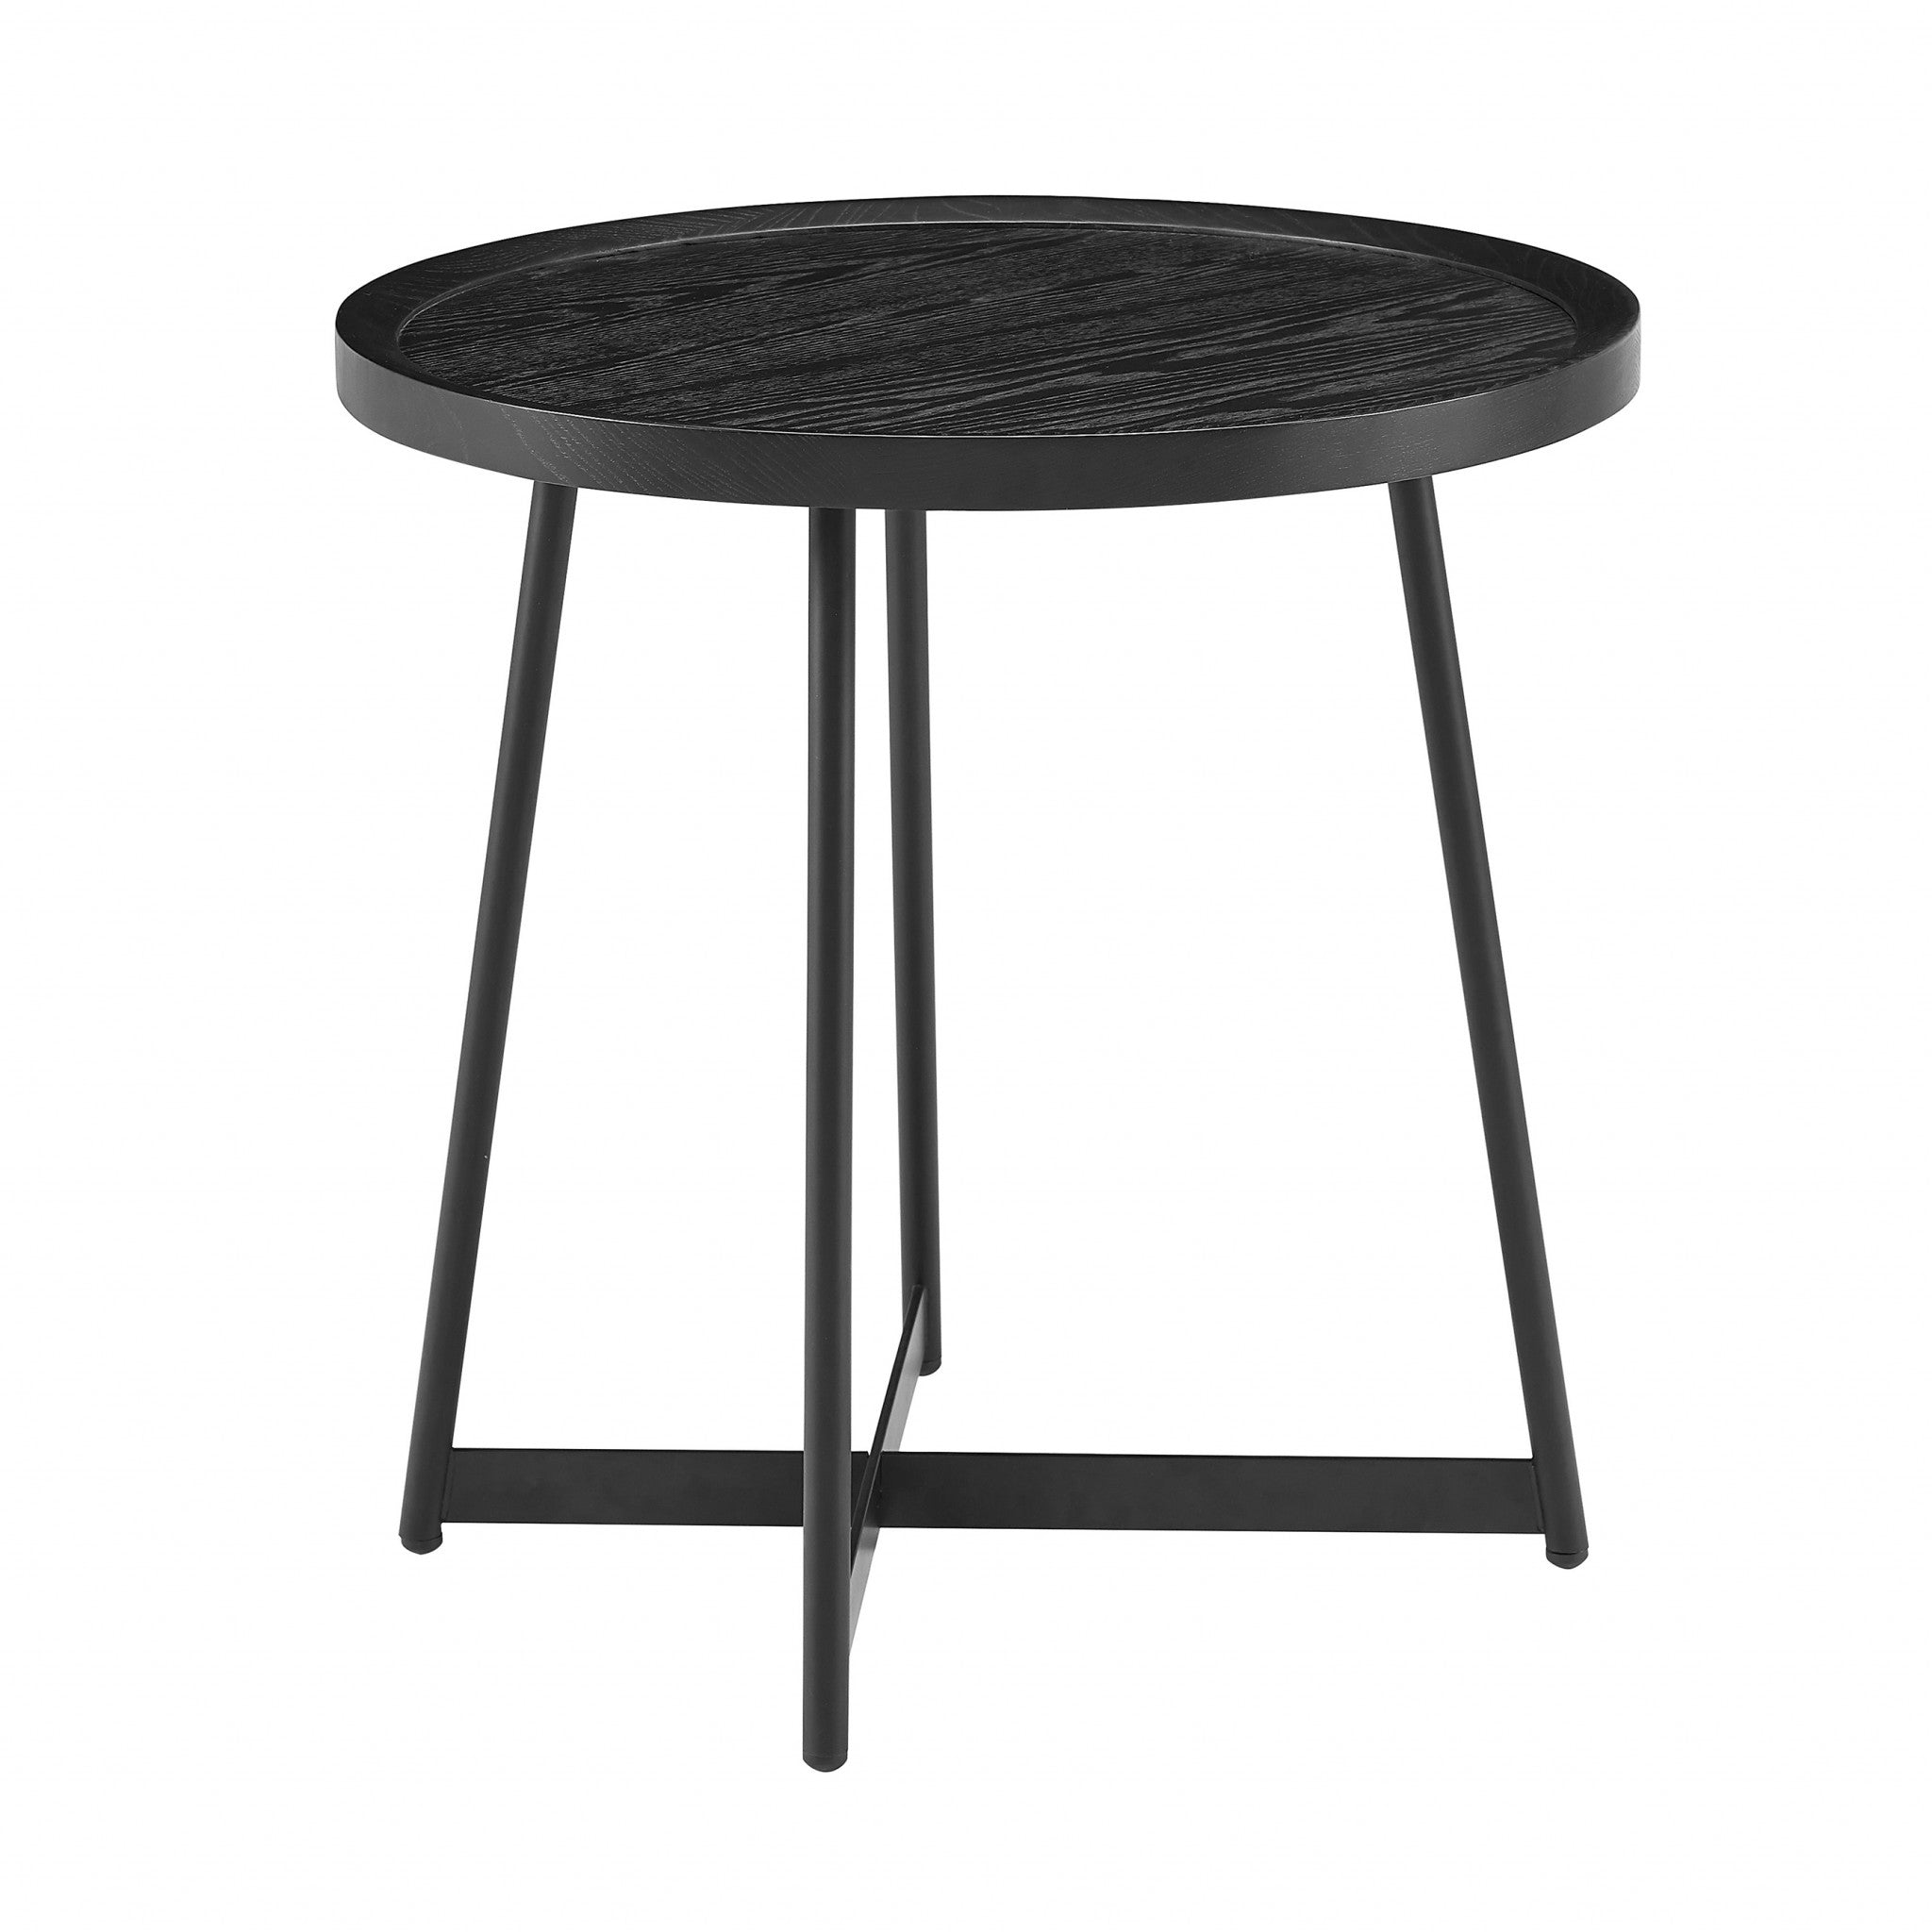 21.66" X 21.66" X 22.05" Round Side Table In Black Ash Wood And Black